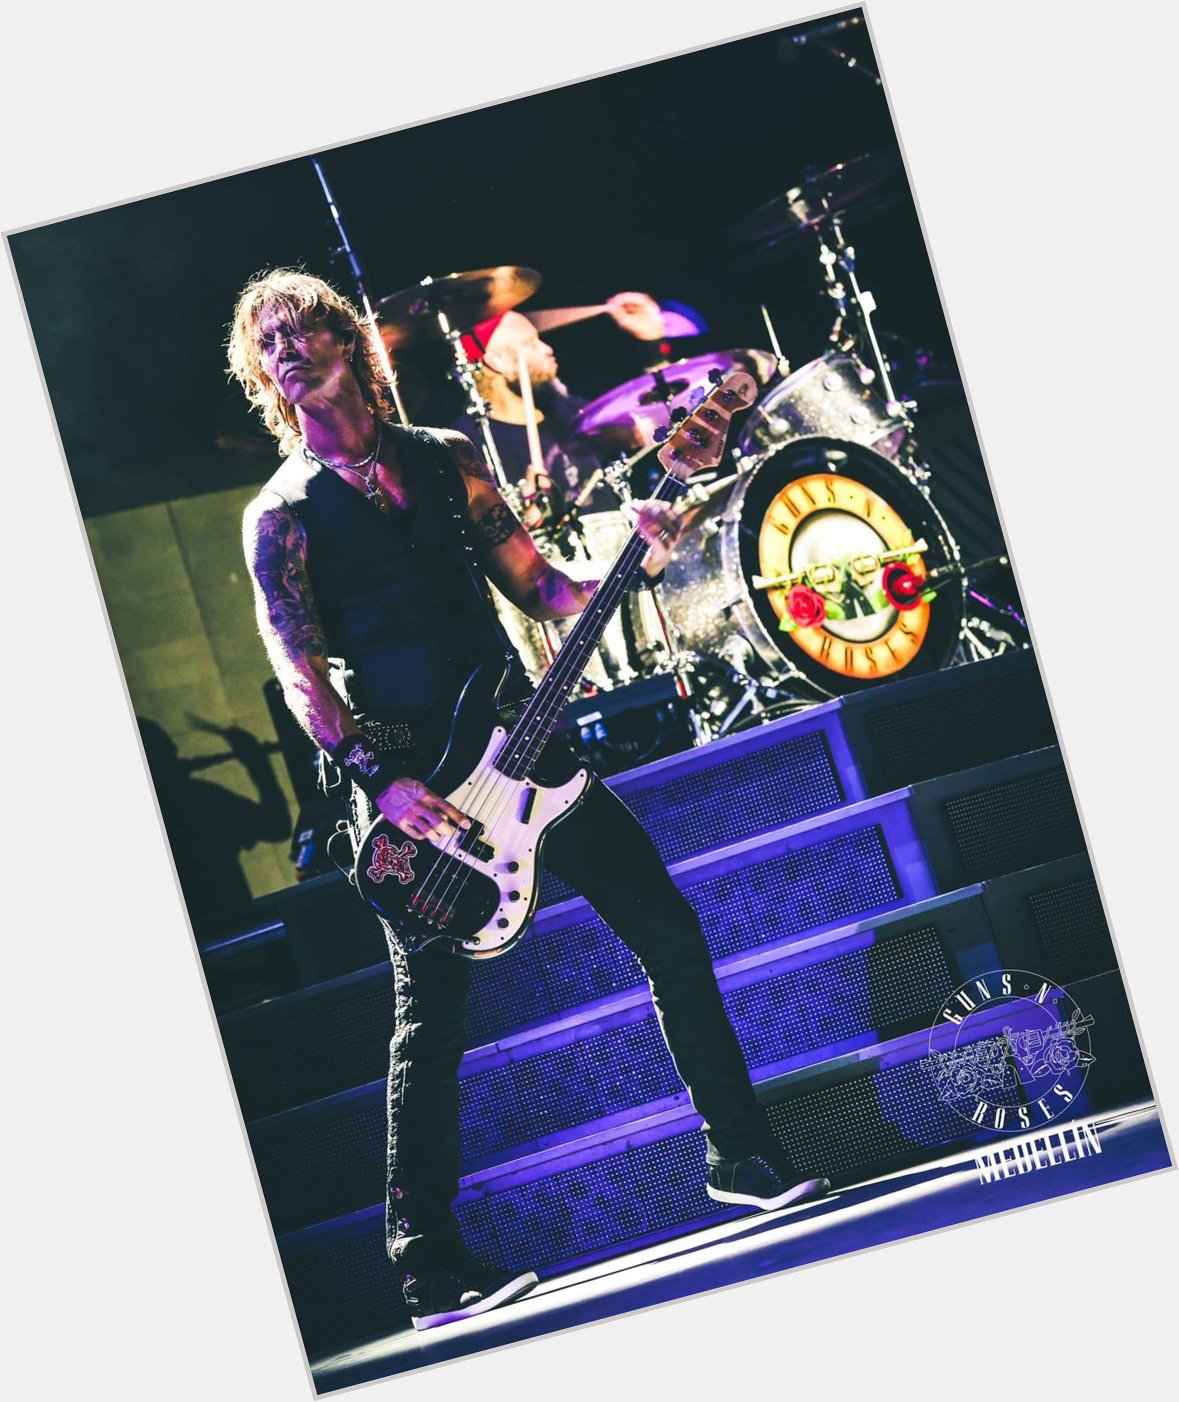 Happy Birthday to Mr. Duff McKagan, legendary bass guitar player in Greetings from Colombia Duff. 